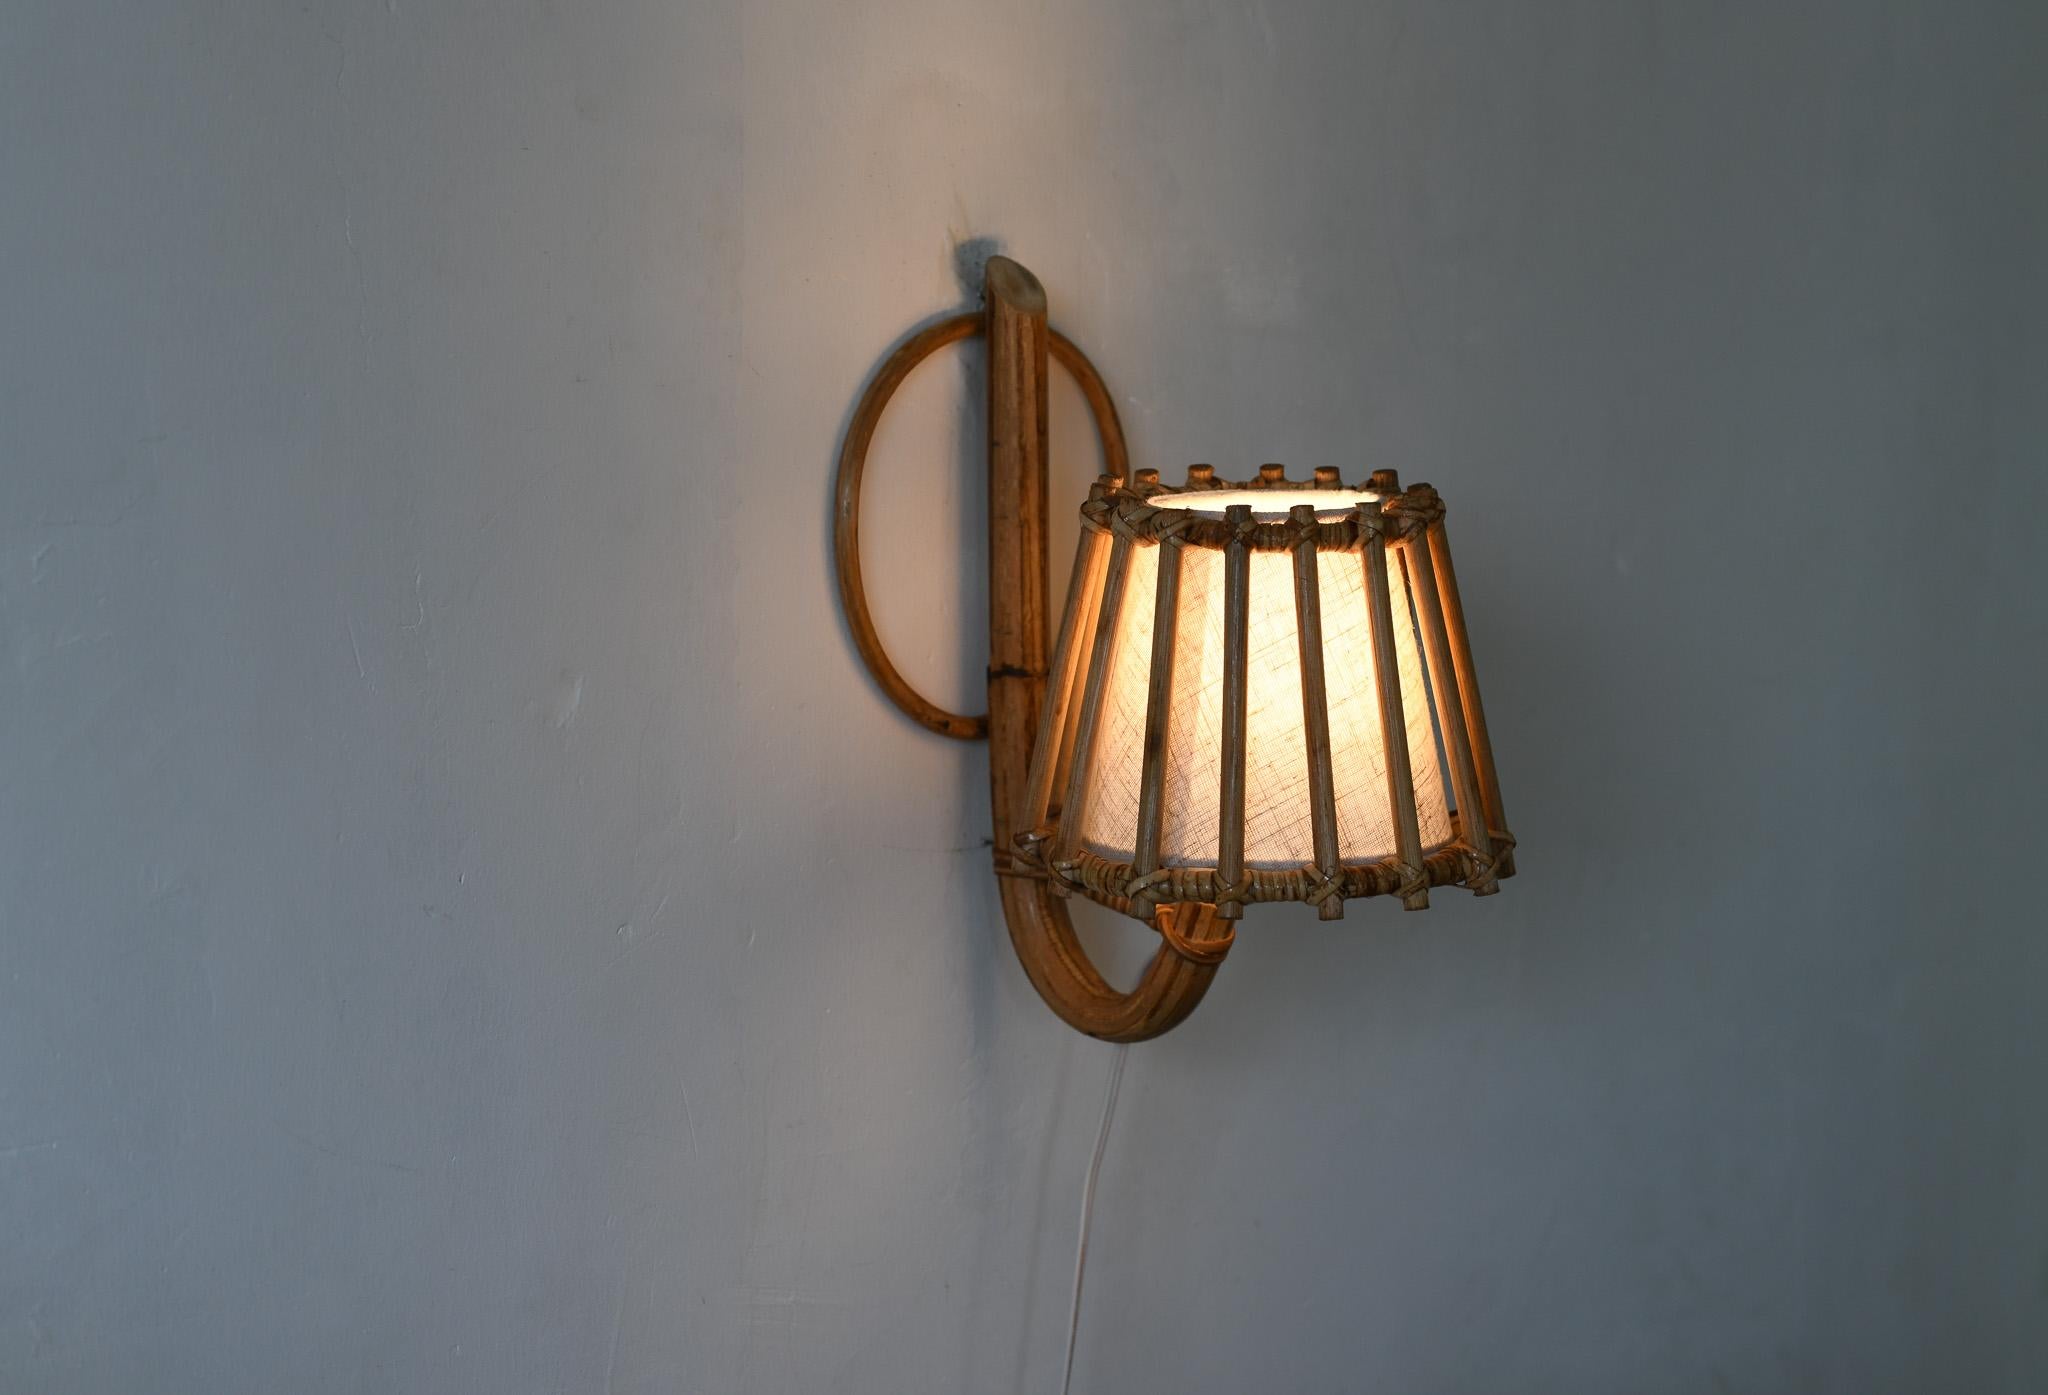 This charming Organic Pencil reed rattan wall mounted sconce lamp is designed to bring a touch of mid-century French elegance to any room. Crafted from Rattan, its distinctive oraganic shape will provide the perfect mood lighting for bedrooms and